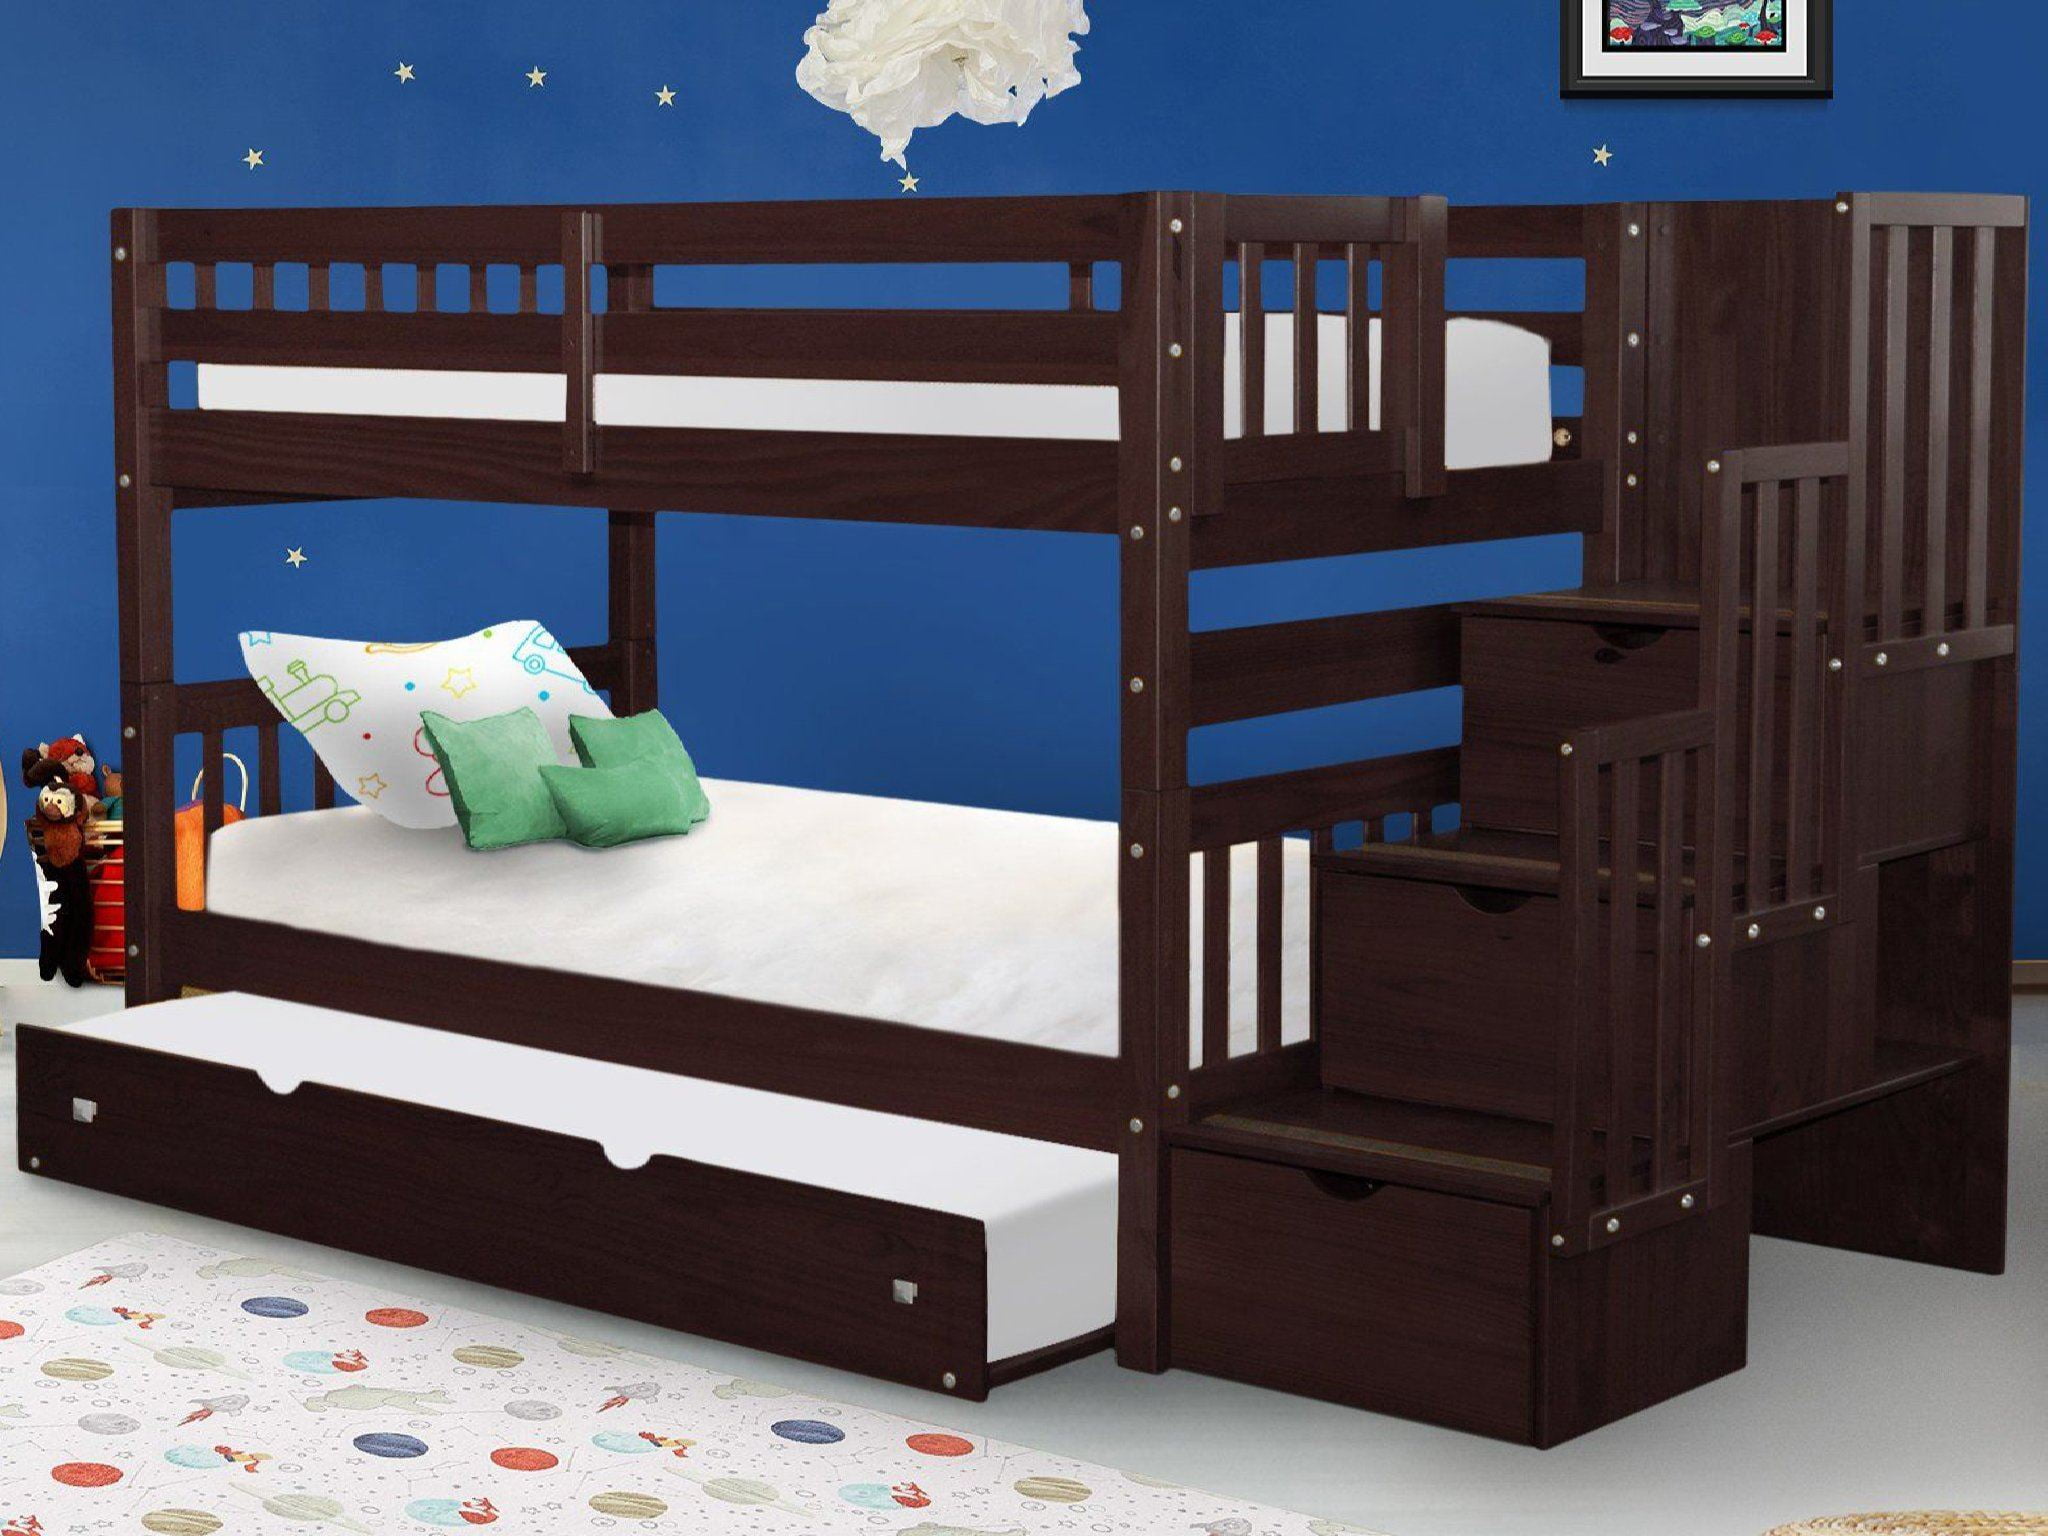 Acme Furniture Allentown Twin Over, Allentown Twin Over Twin Wood Bunk Bed White